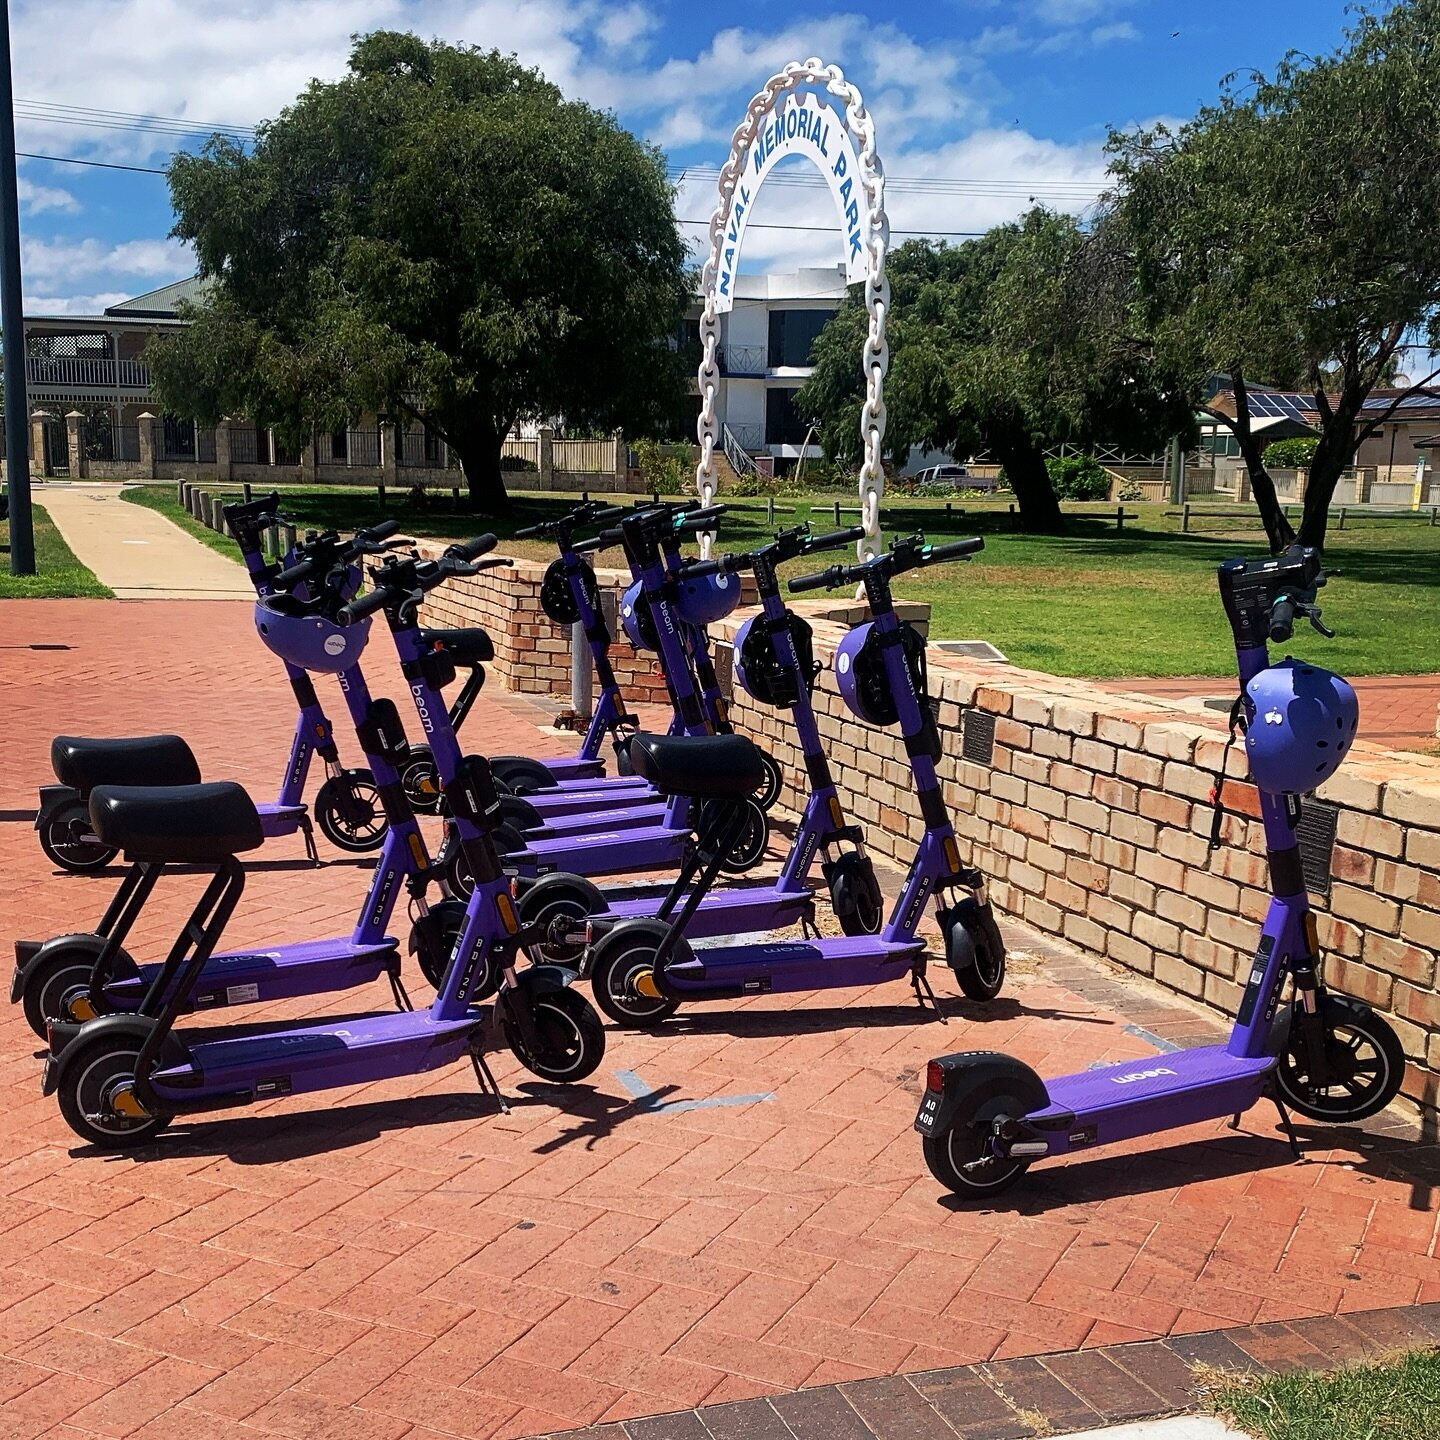 We love these @ridebeamau e-scooters out the front of the park 💜 Beam Mobility Australia are Australia&rsquo;s only Certified Carbon Neutral e-scooters so a big thumbs up from us! 👍👍👍
.
#beambooster #escooter #escooterlife #ceeandsee #beachlife #